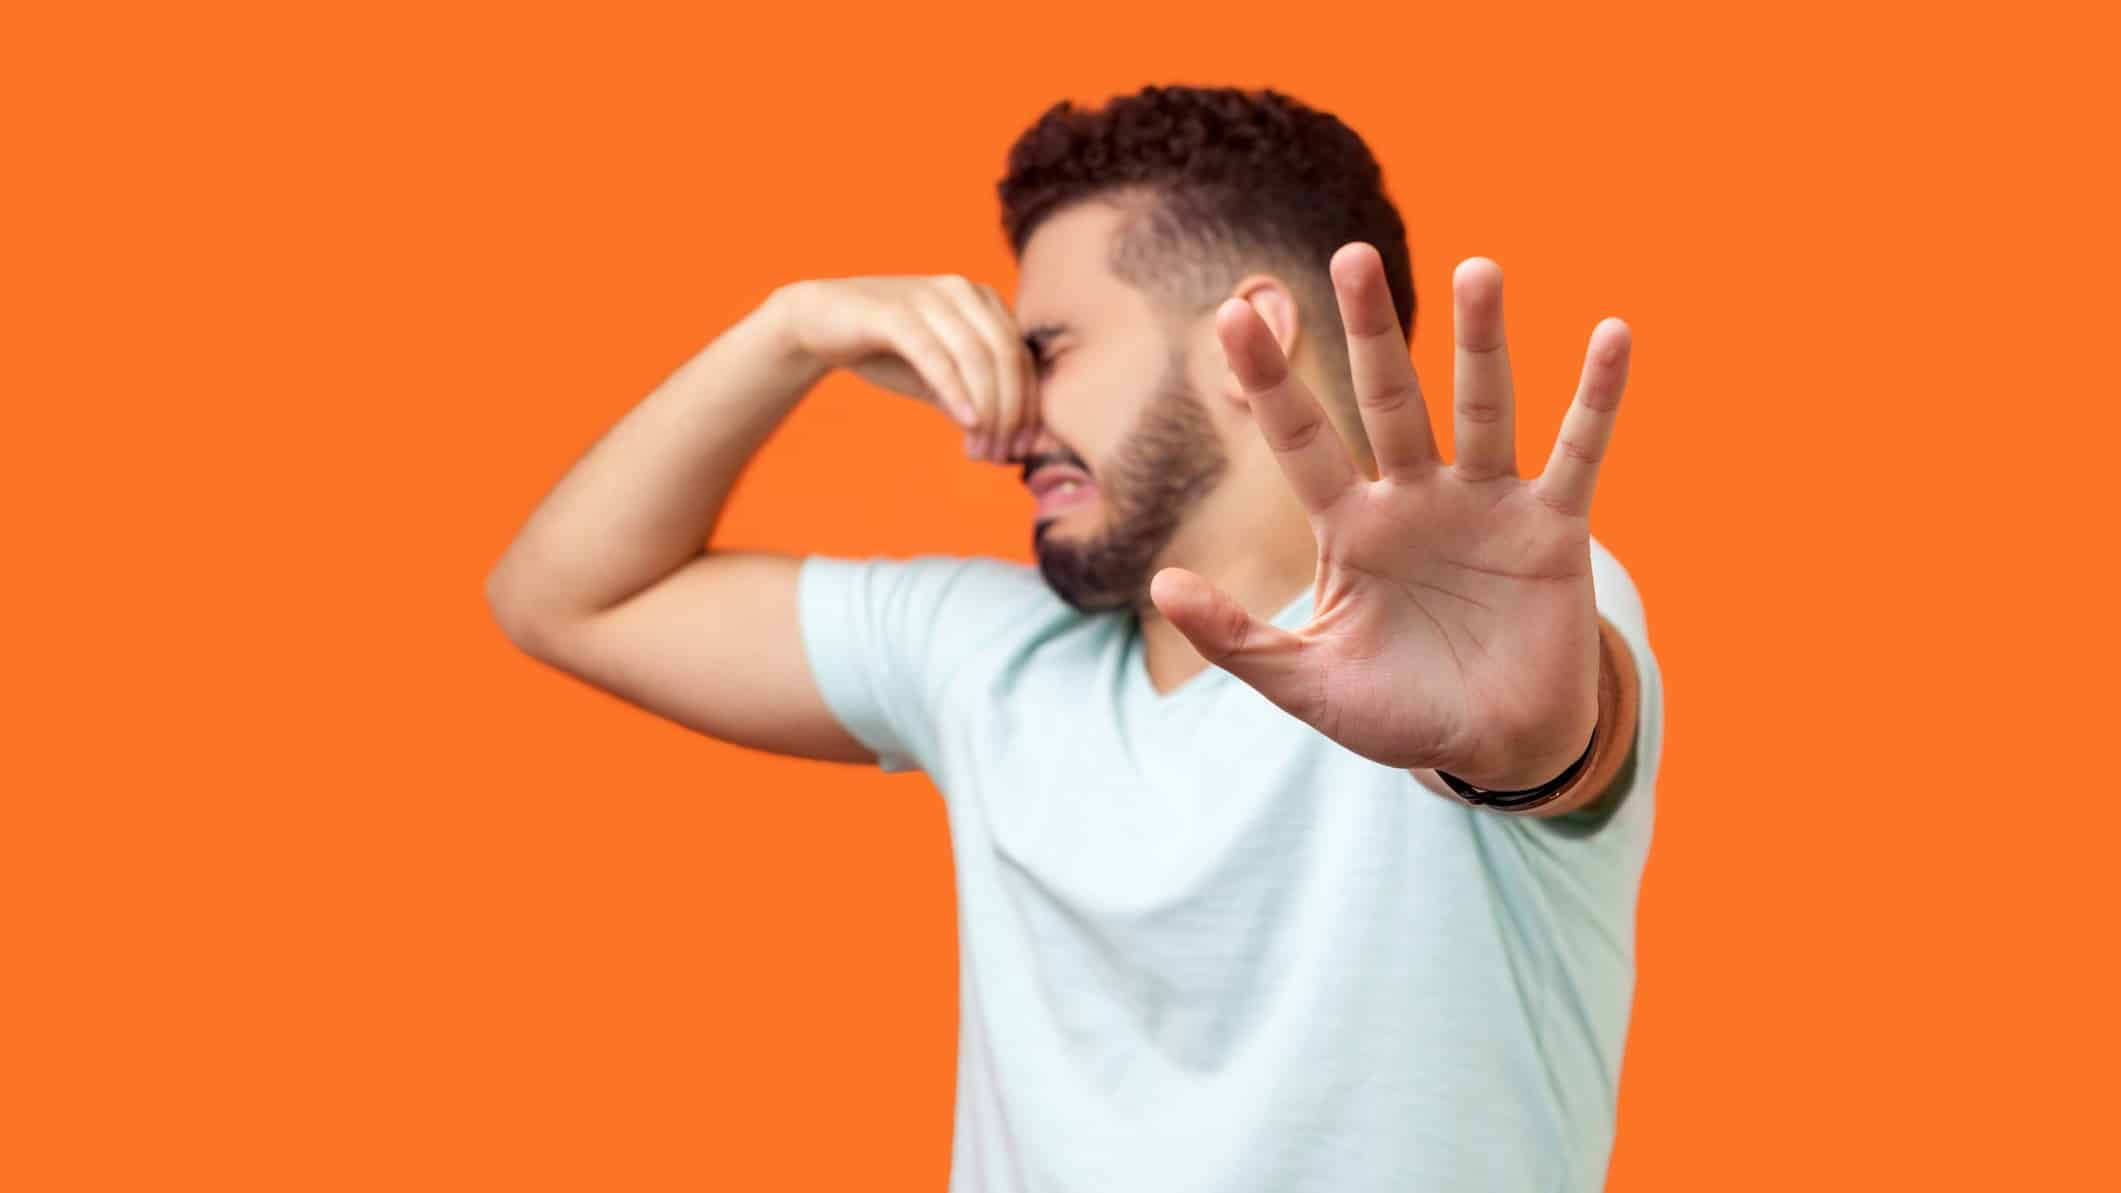 Man pinching nose and holding other hand up in a 'stop' gesture turning away in front of an orange background